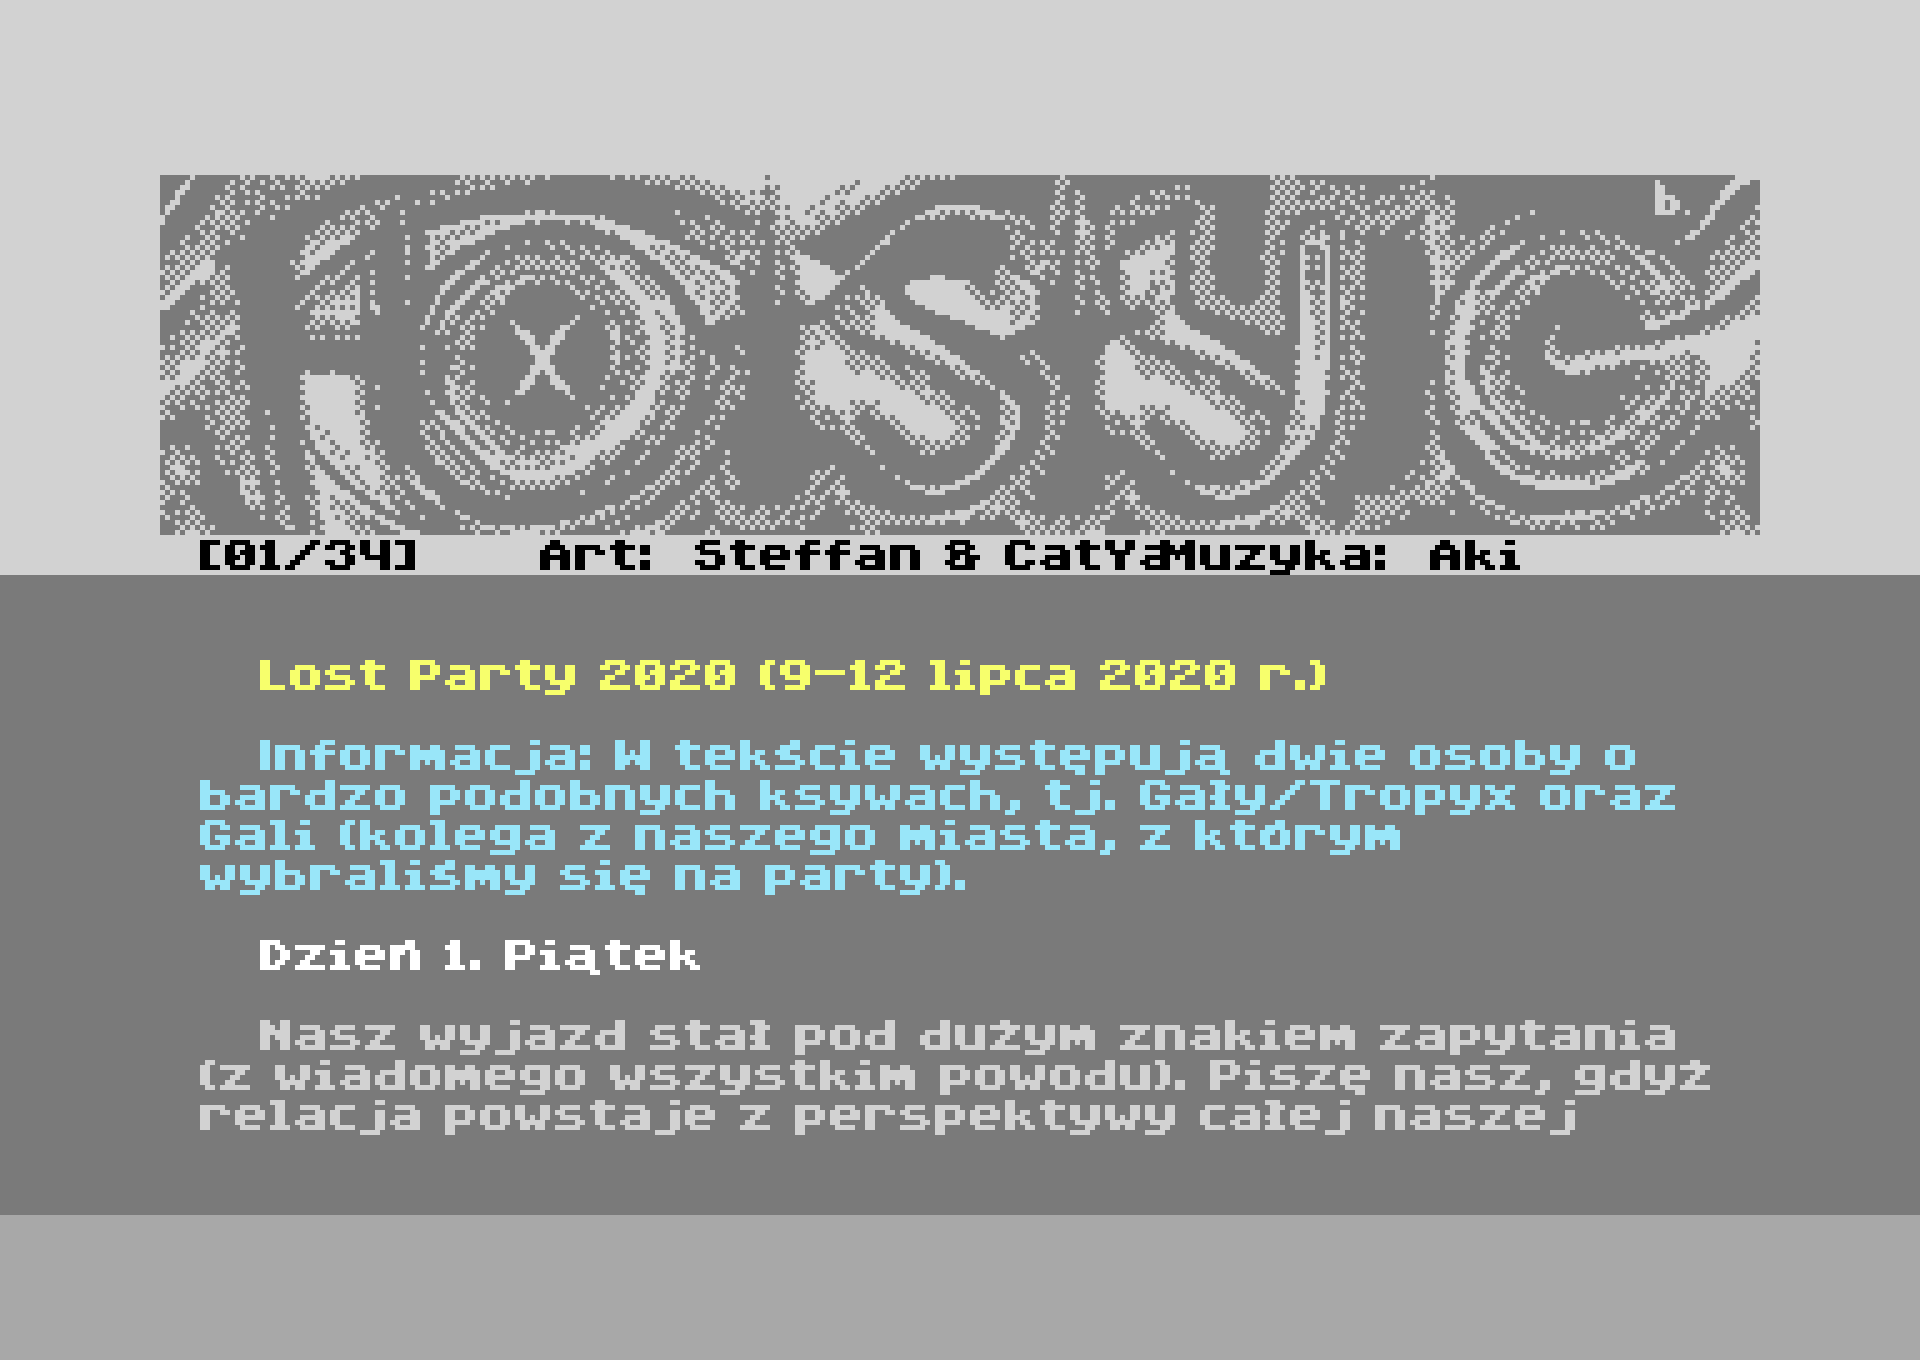 https://www.lostparty.pl/2021/gfx/varia/Hot-Style-10-3.png